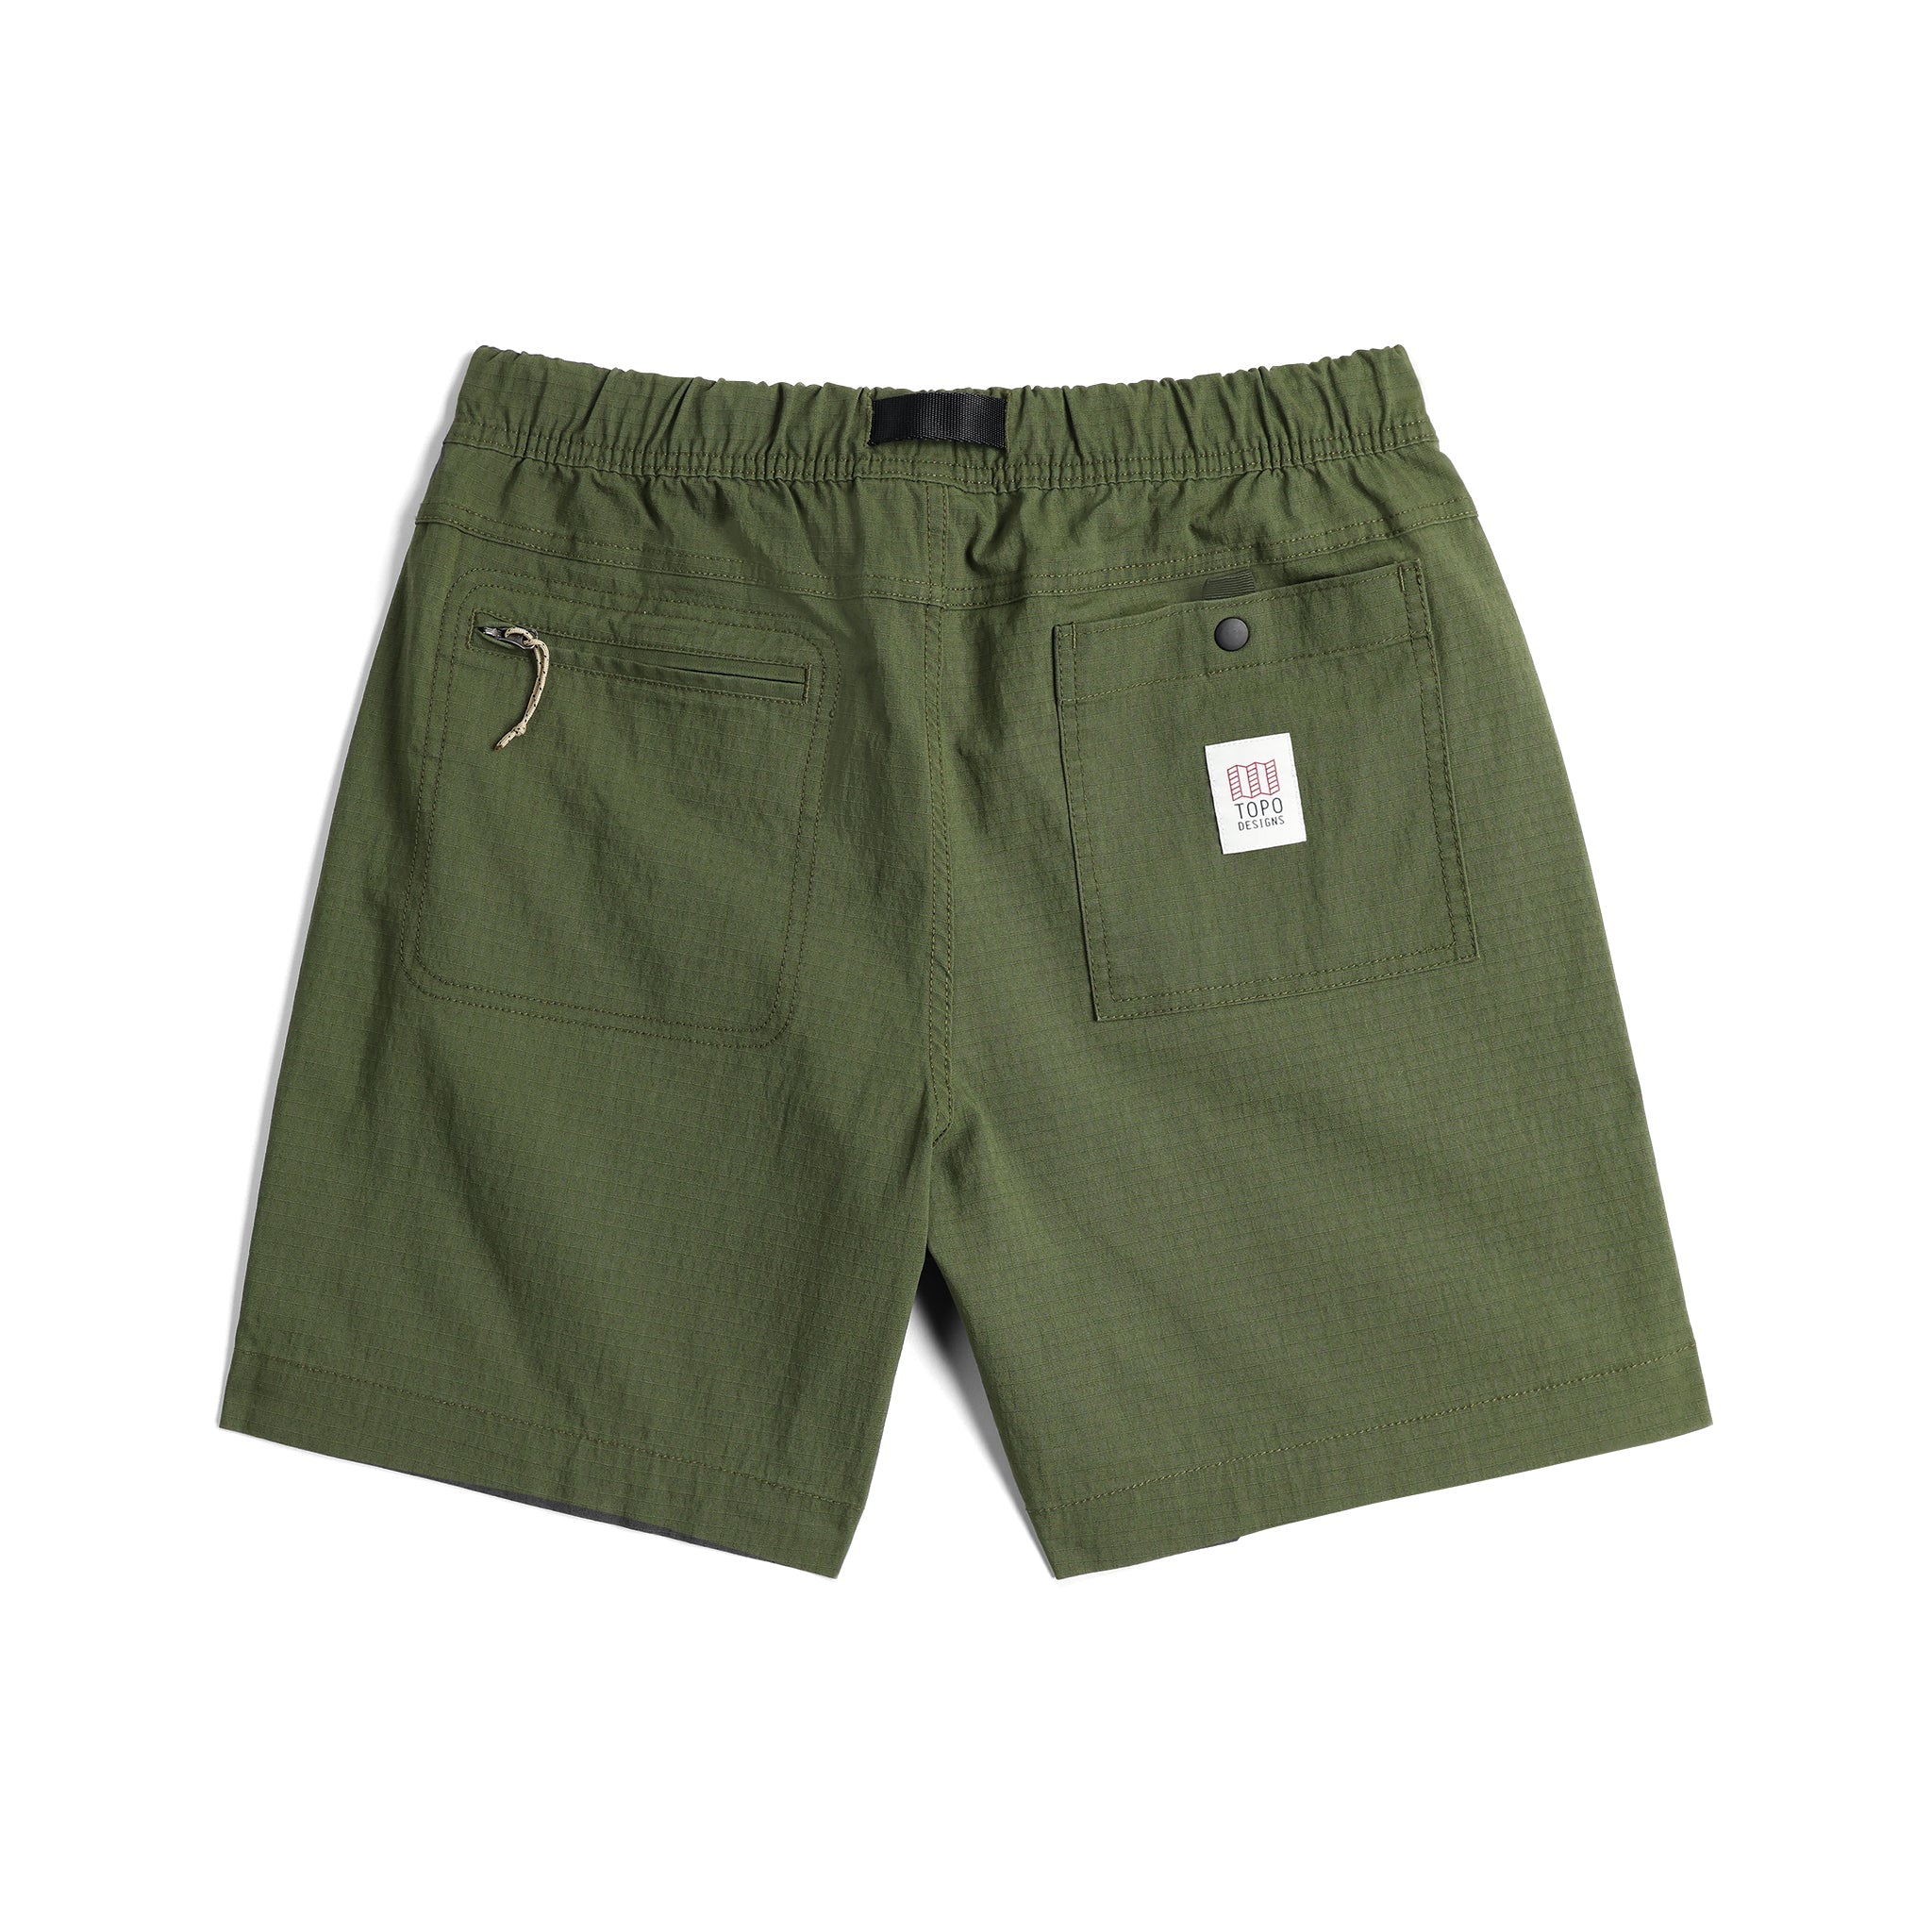 Back View of Topo Designs Mountain Short Ripstop - Men's in "Olive"